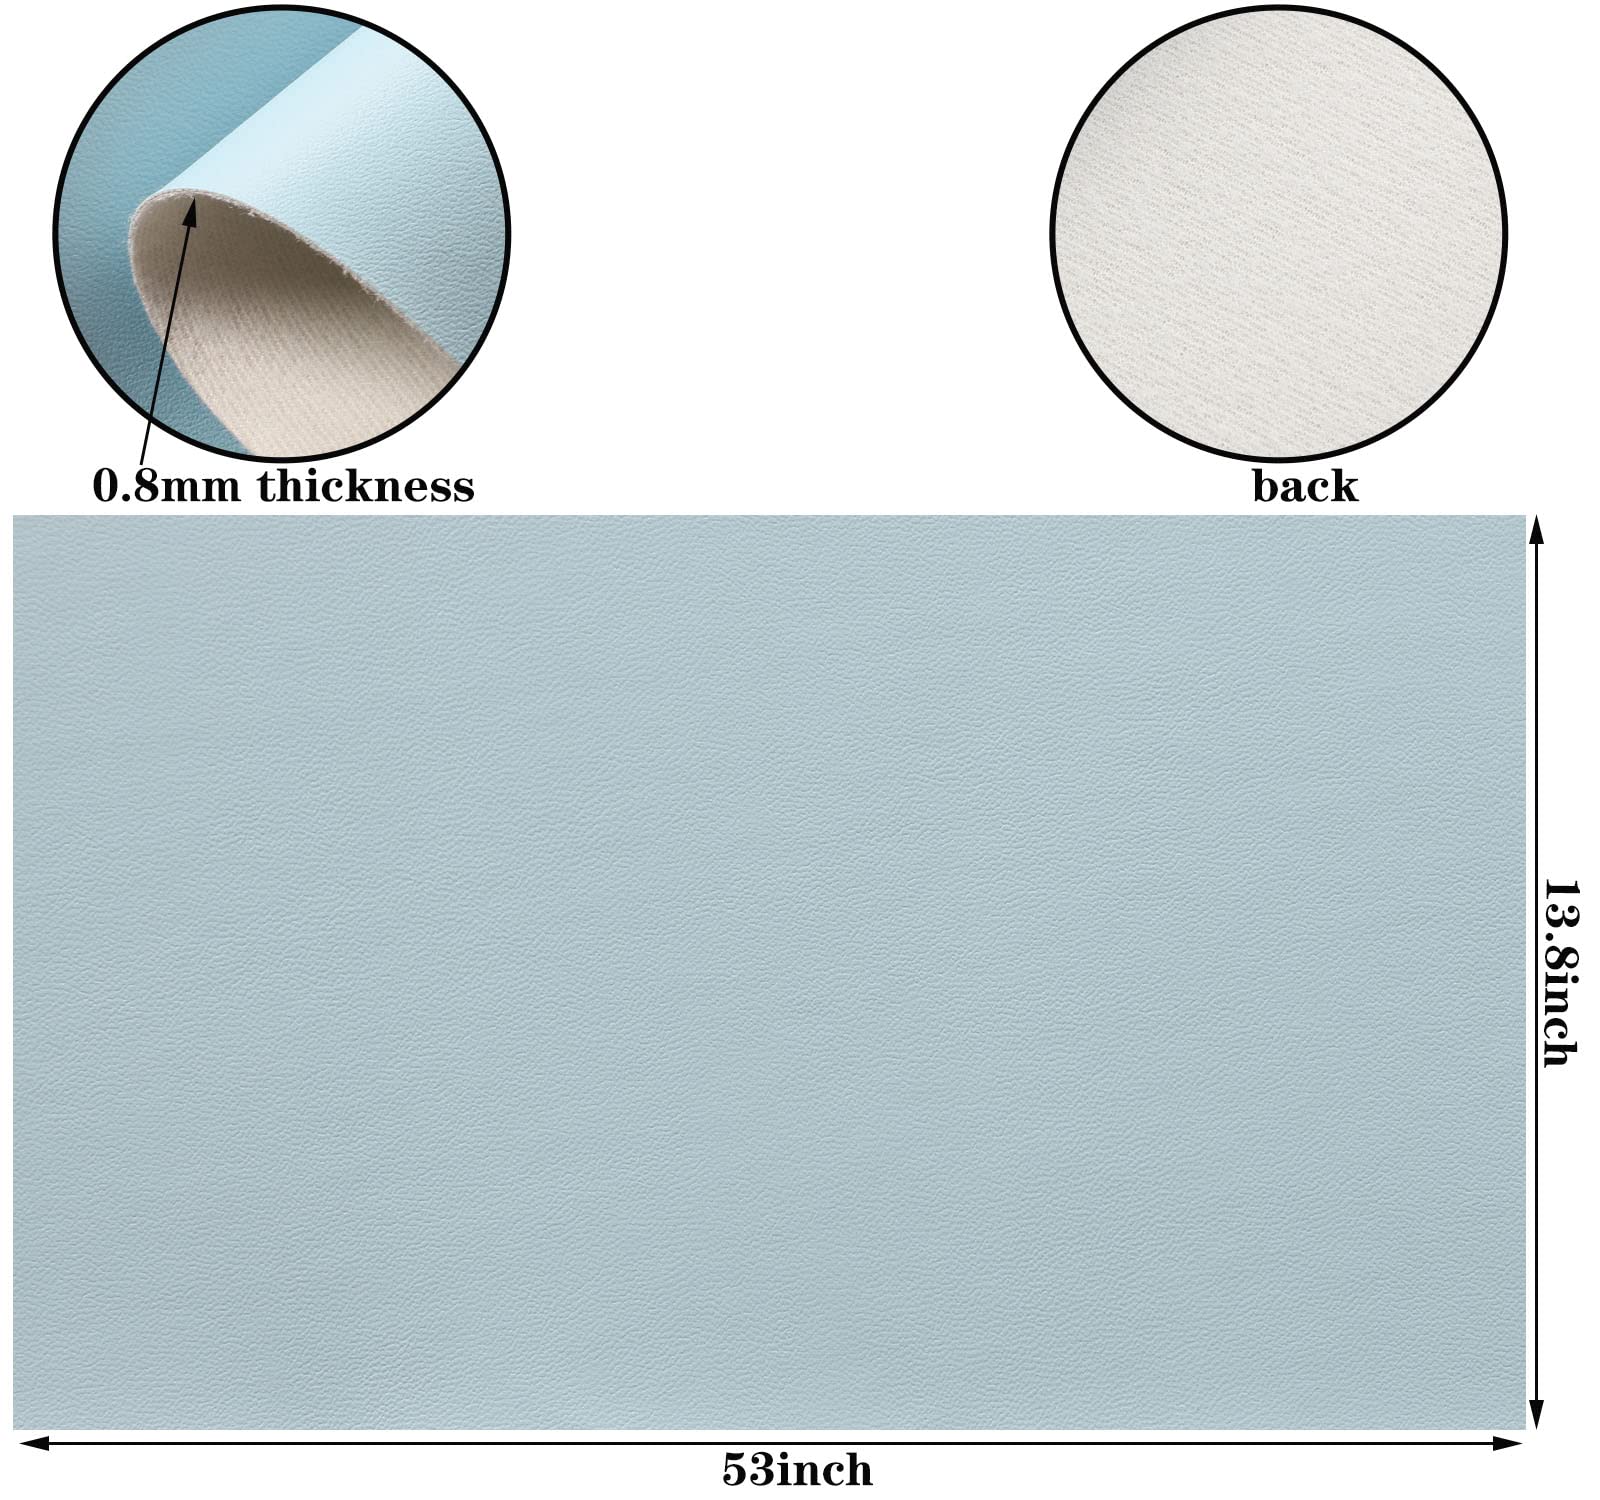 Picheng Smooth Solid Color Faux Leather Sheets 13.8"X53"(35cmX135cm),Soft Faux Leather Roll Very Suitable for Making Crafts,Leather Earrings, Bows,Sewing DIY Projects (Light Blue)